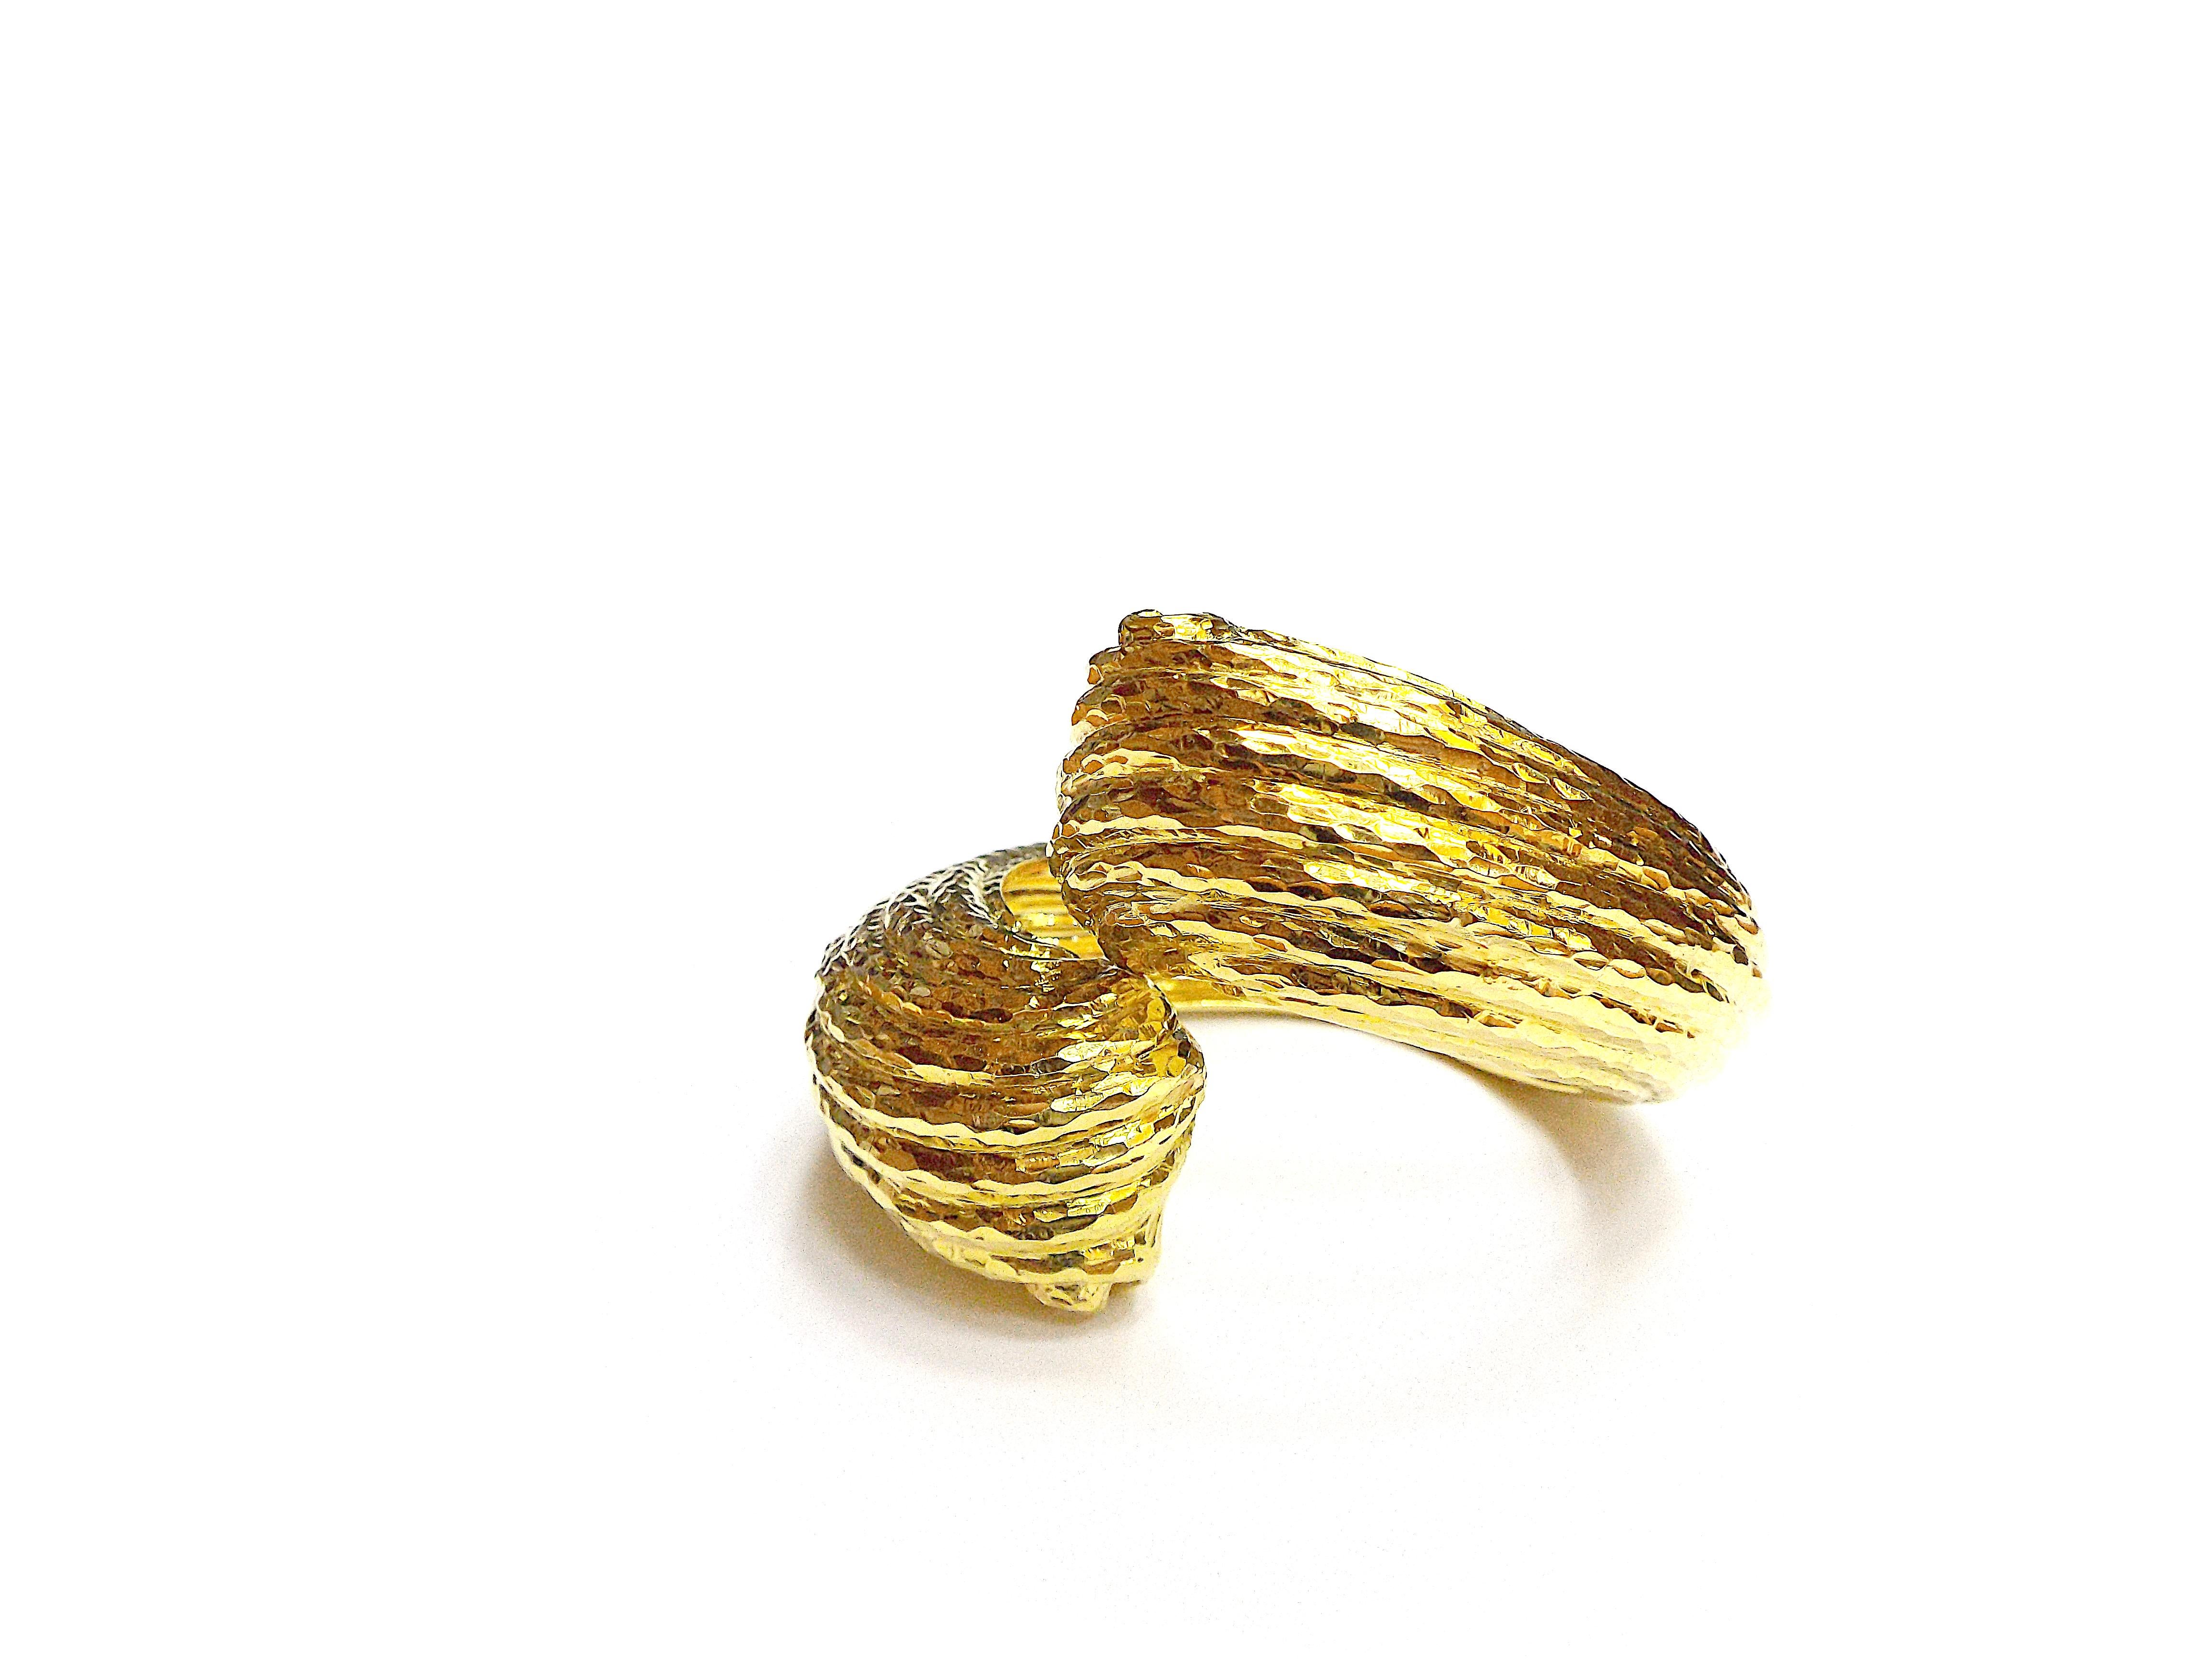 An elegant chunky cuff bracelet by David Webb made of 18k yellow gold. Of hinged crossover design with a hammered finish; signed David Webb, marked 18K; inner circumference 6 in.